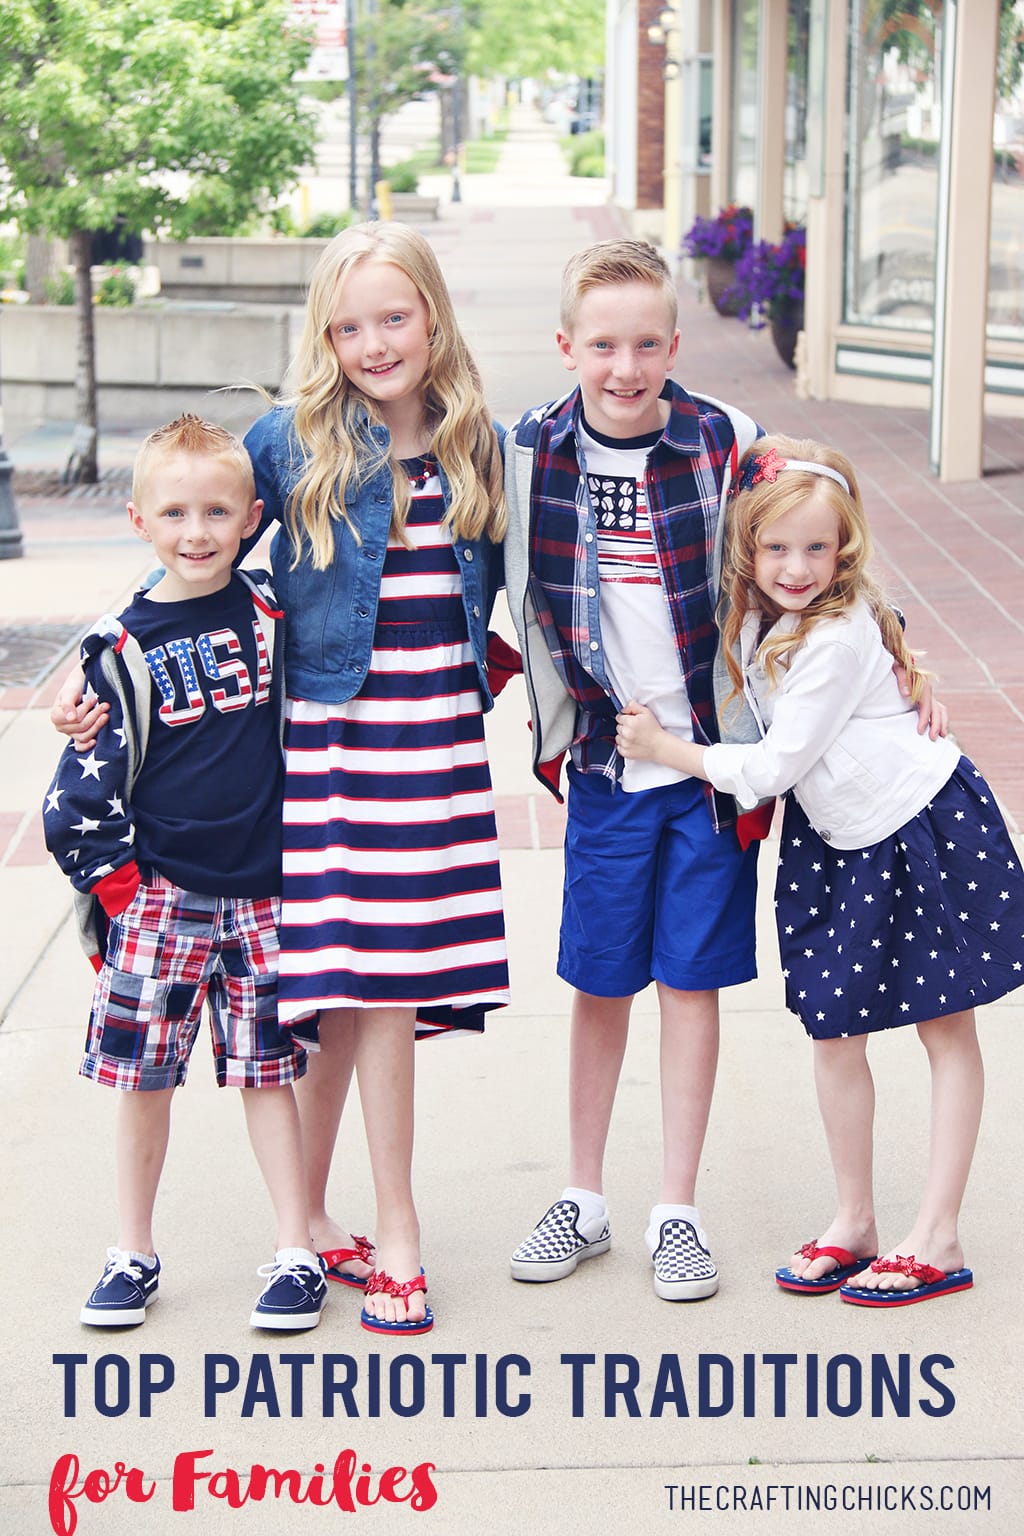 Top Patriotic Traditions for Families